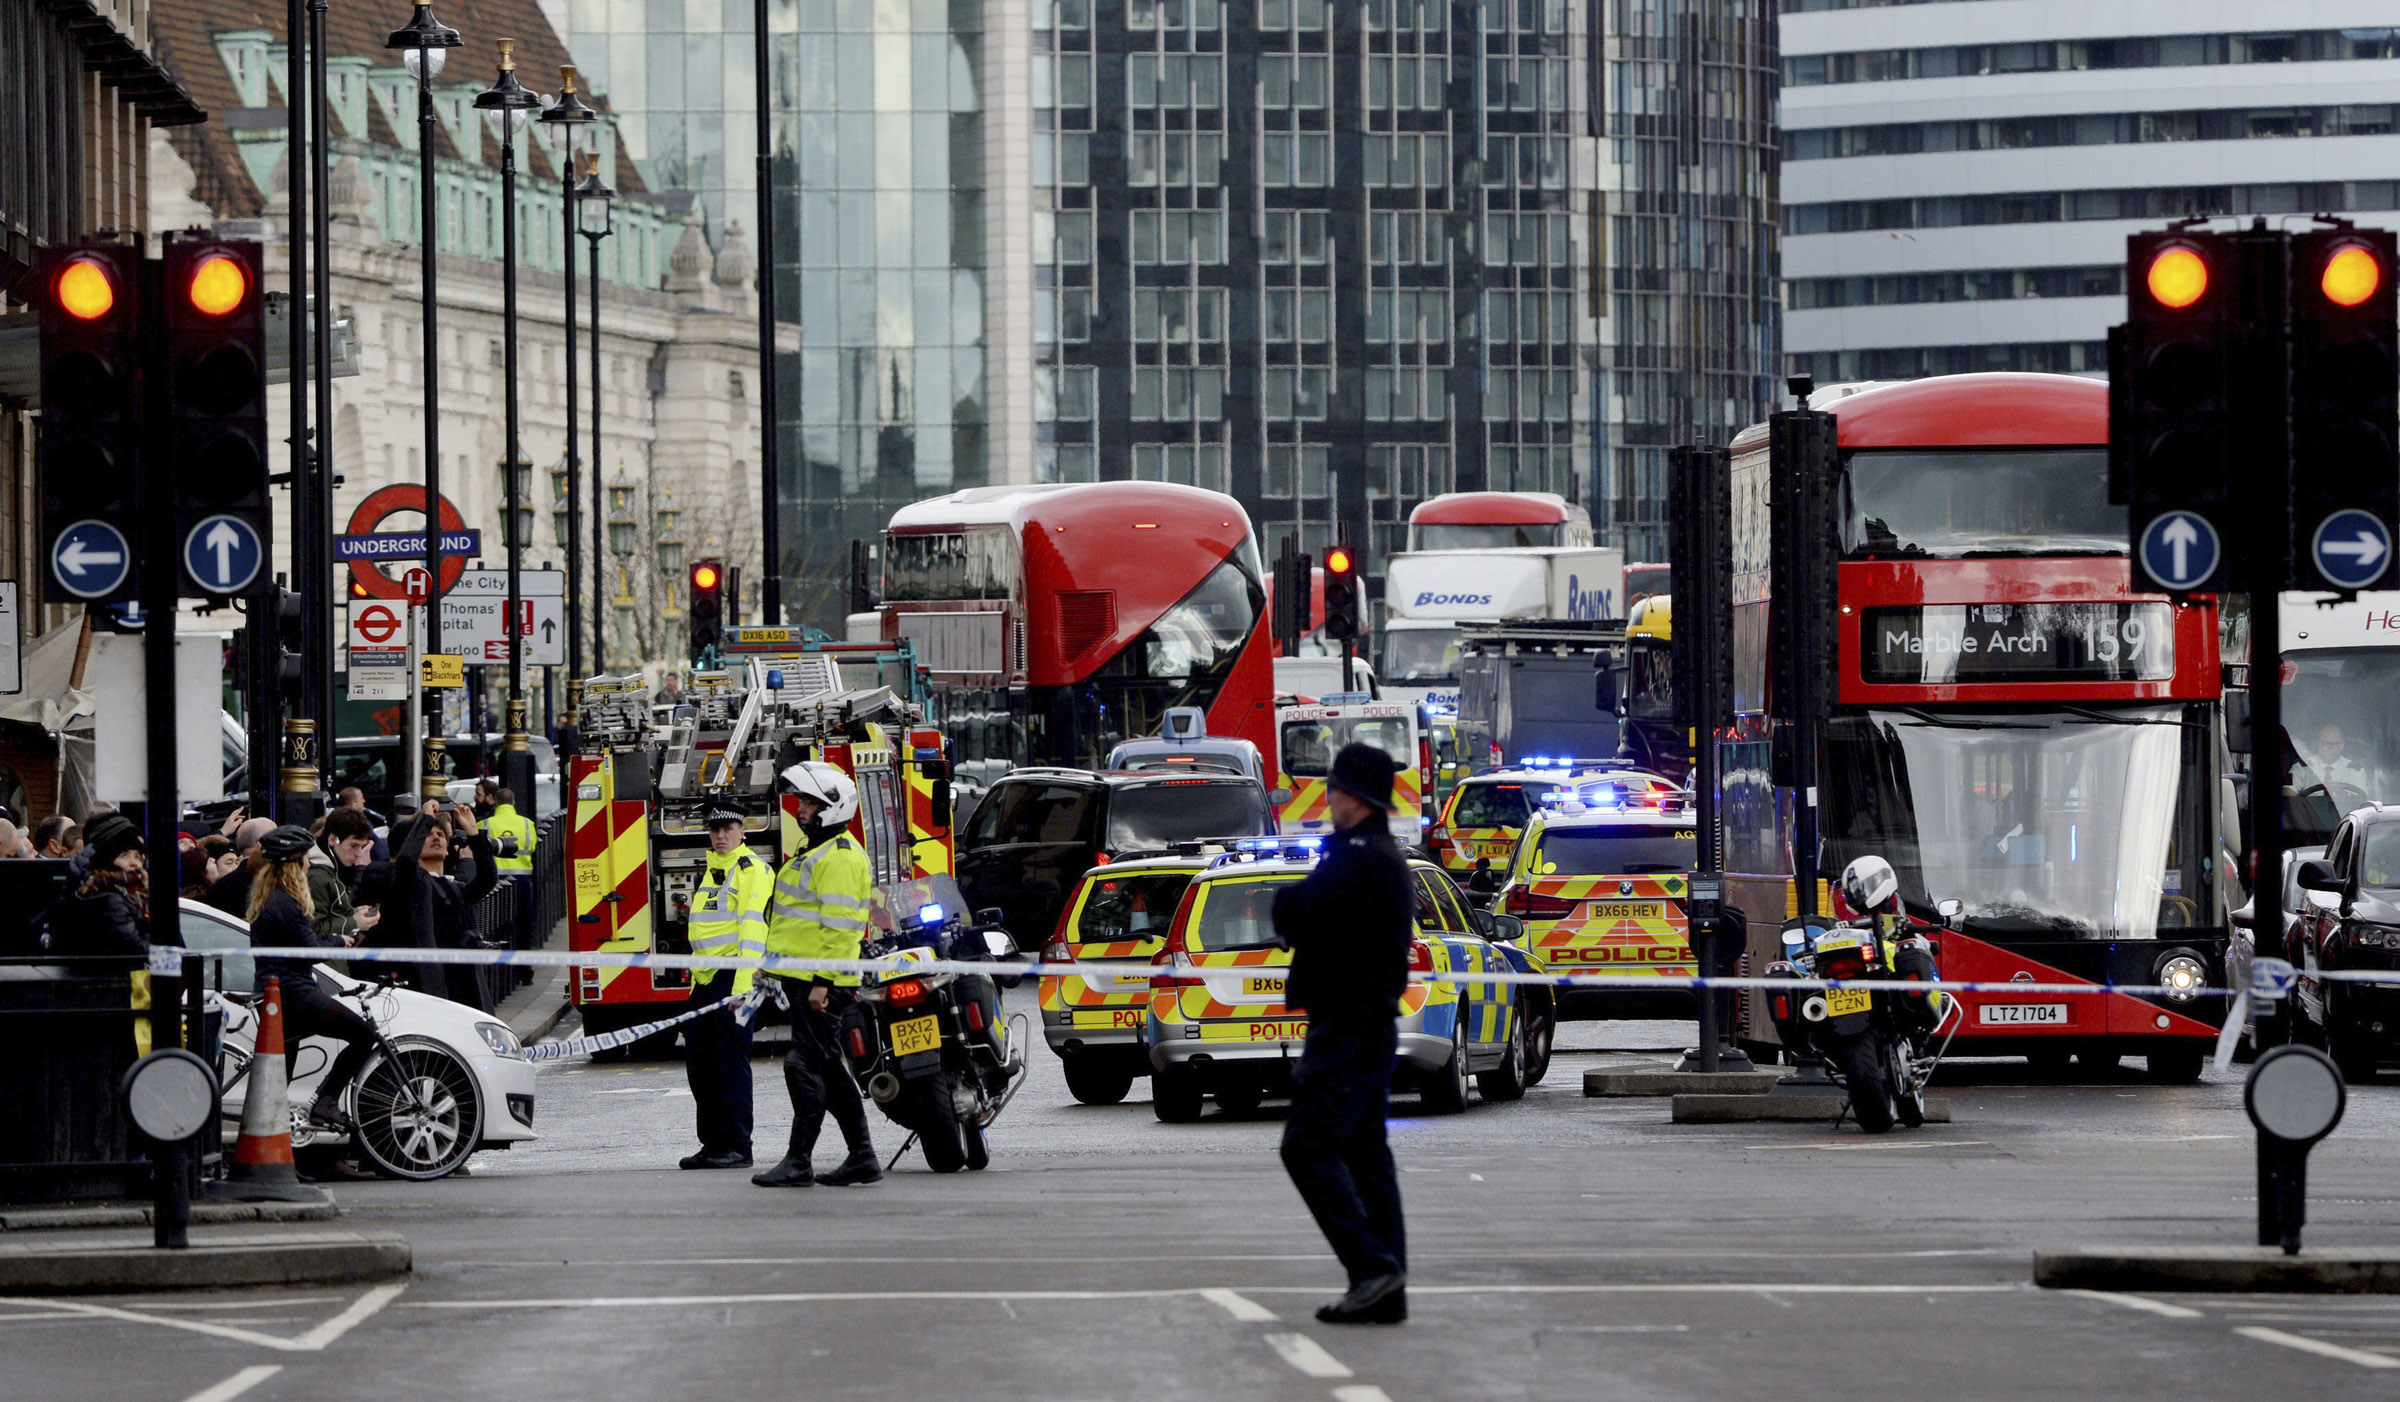 At least 4 dead in car rampage, knife attack in London